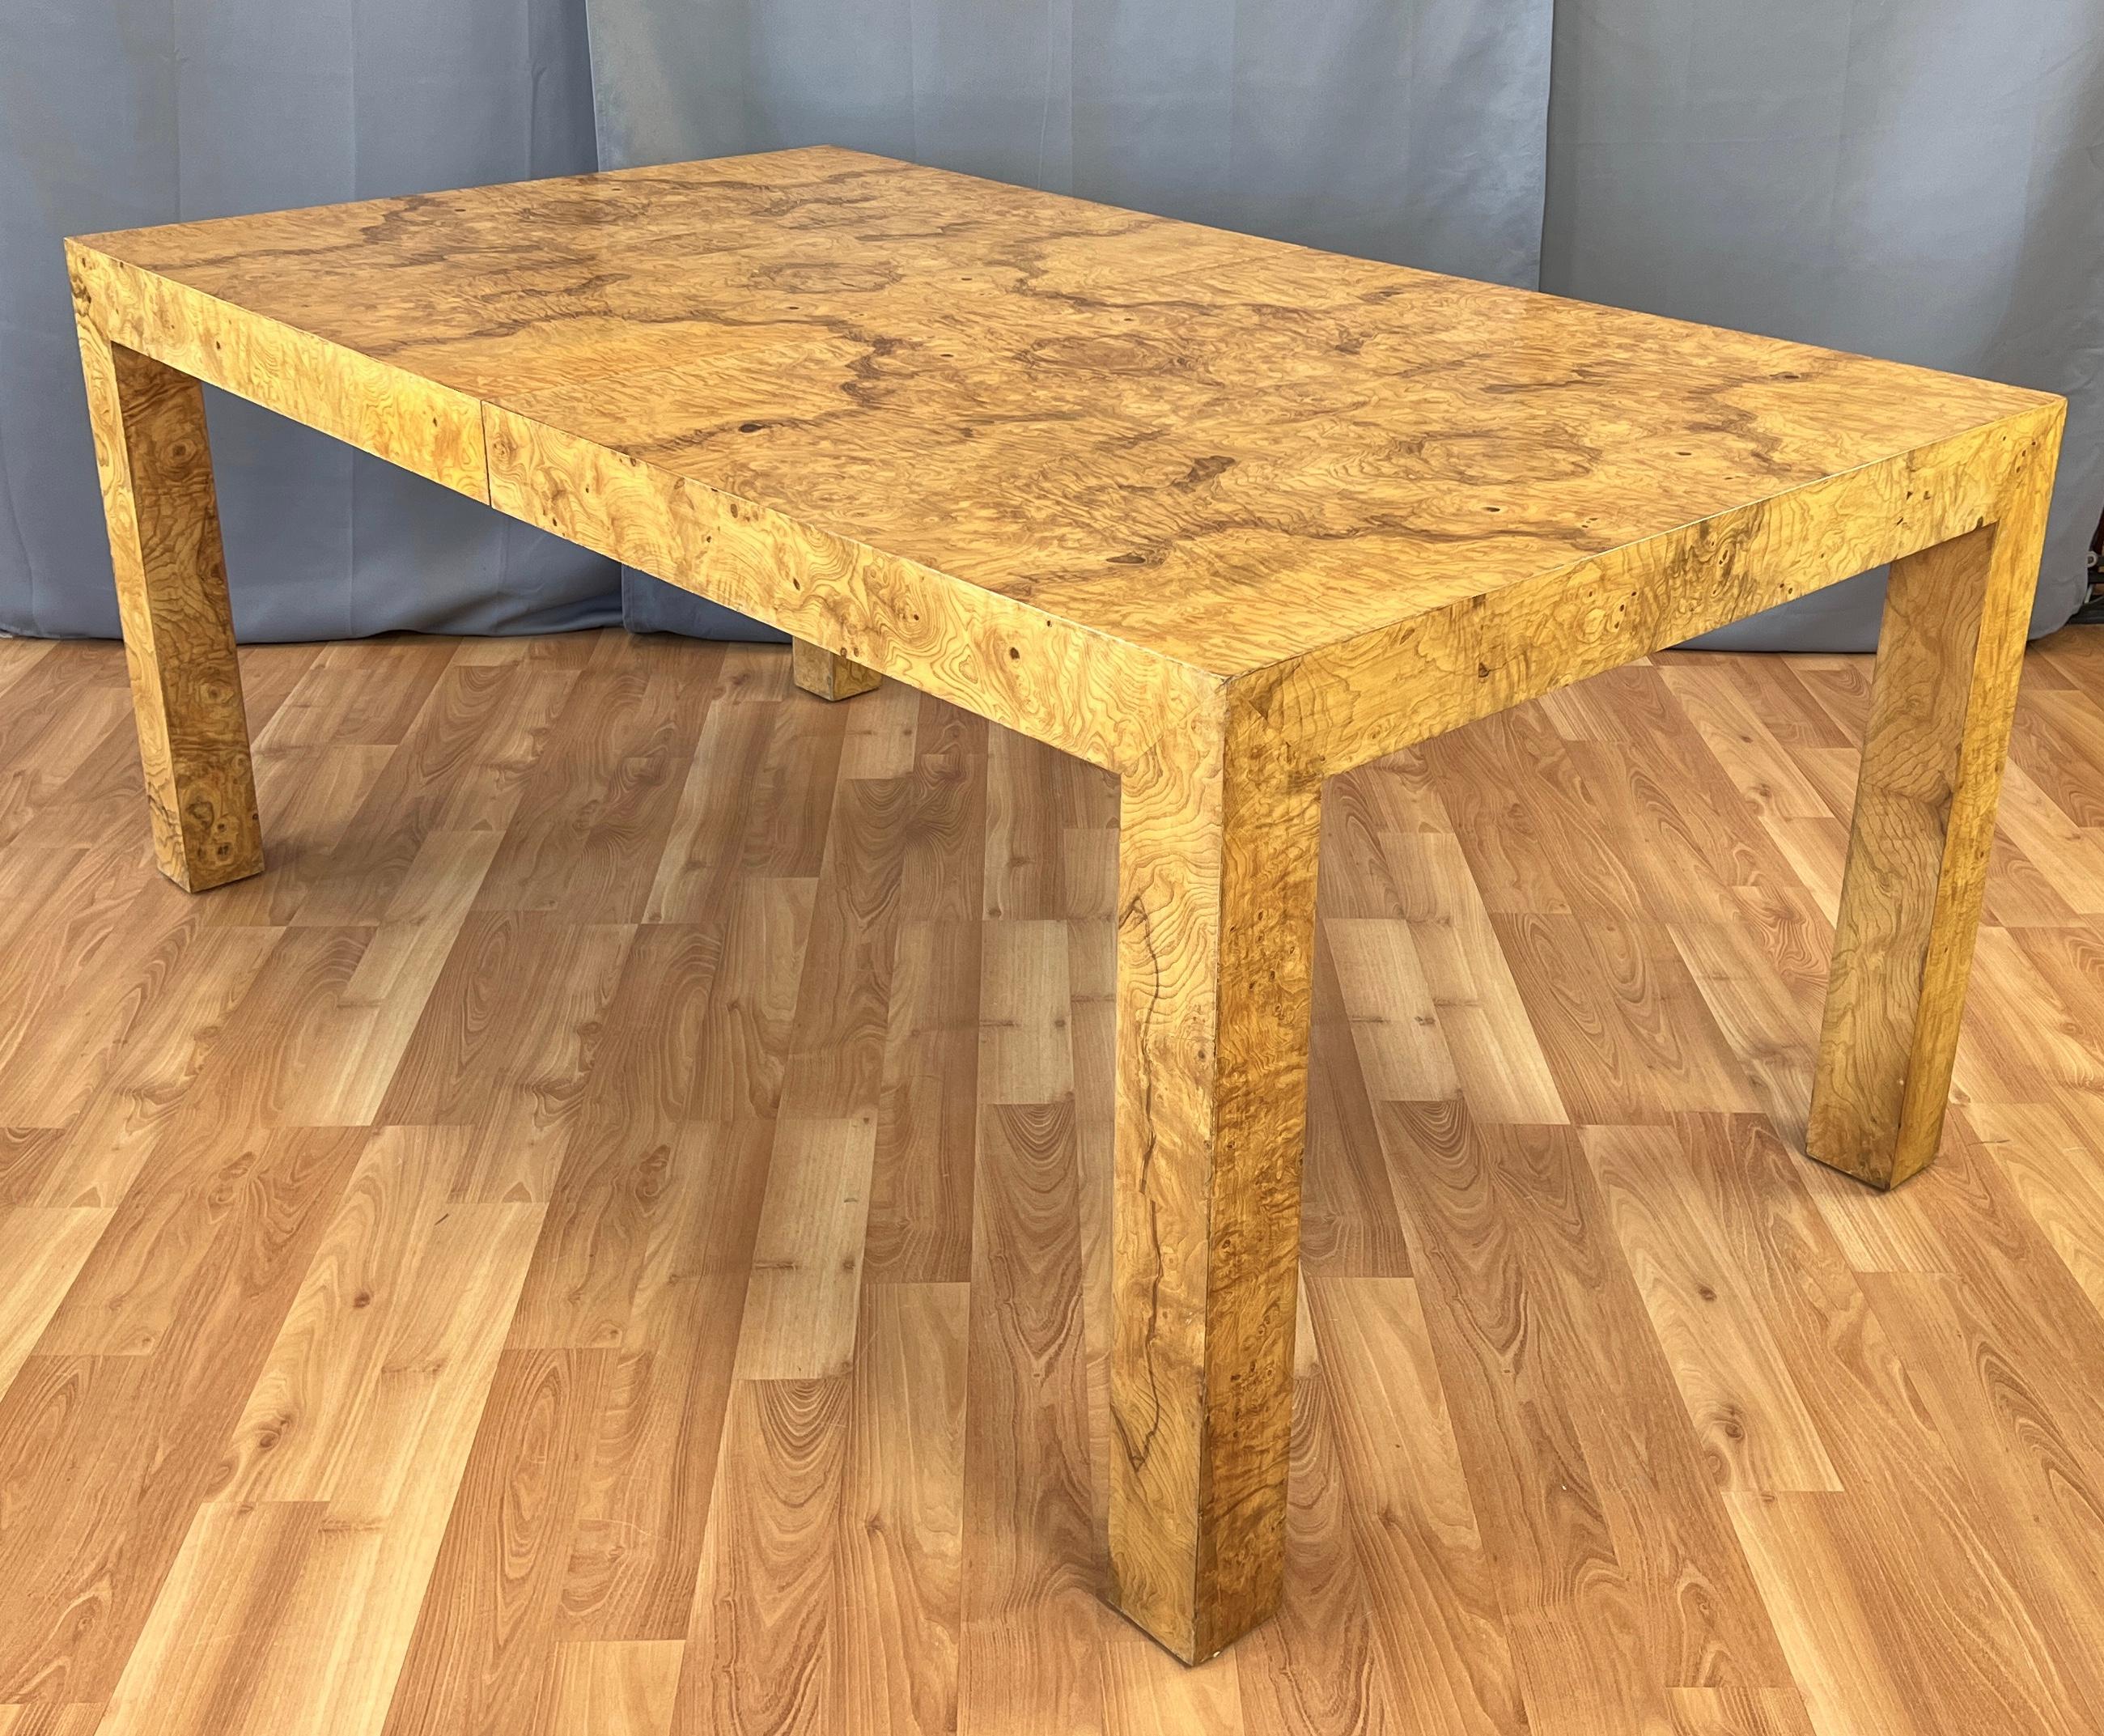 Offered here is a Parsons style dining table in Maple Burl designed by Milo Baughman for Thayer Coggin.
Classic clean lines, with wonderful burled wood grains giving a stunning look. 
Table is in such nice condition, that it looks to have been